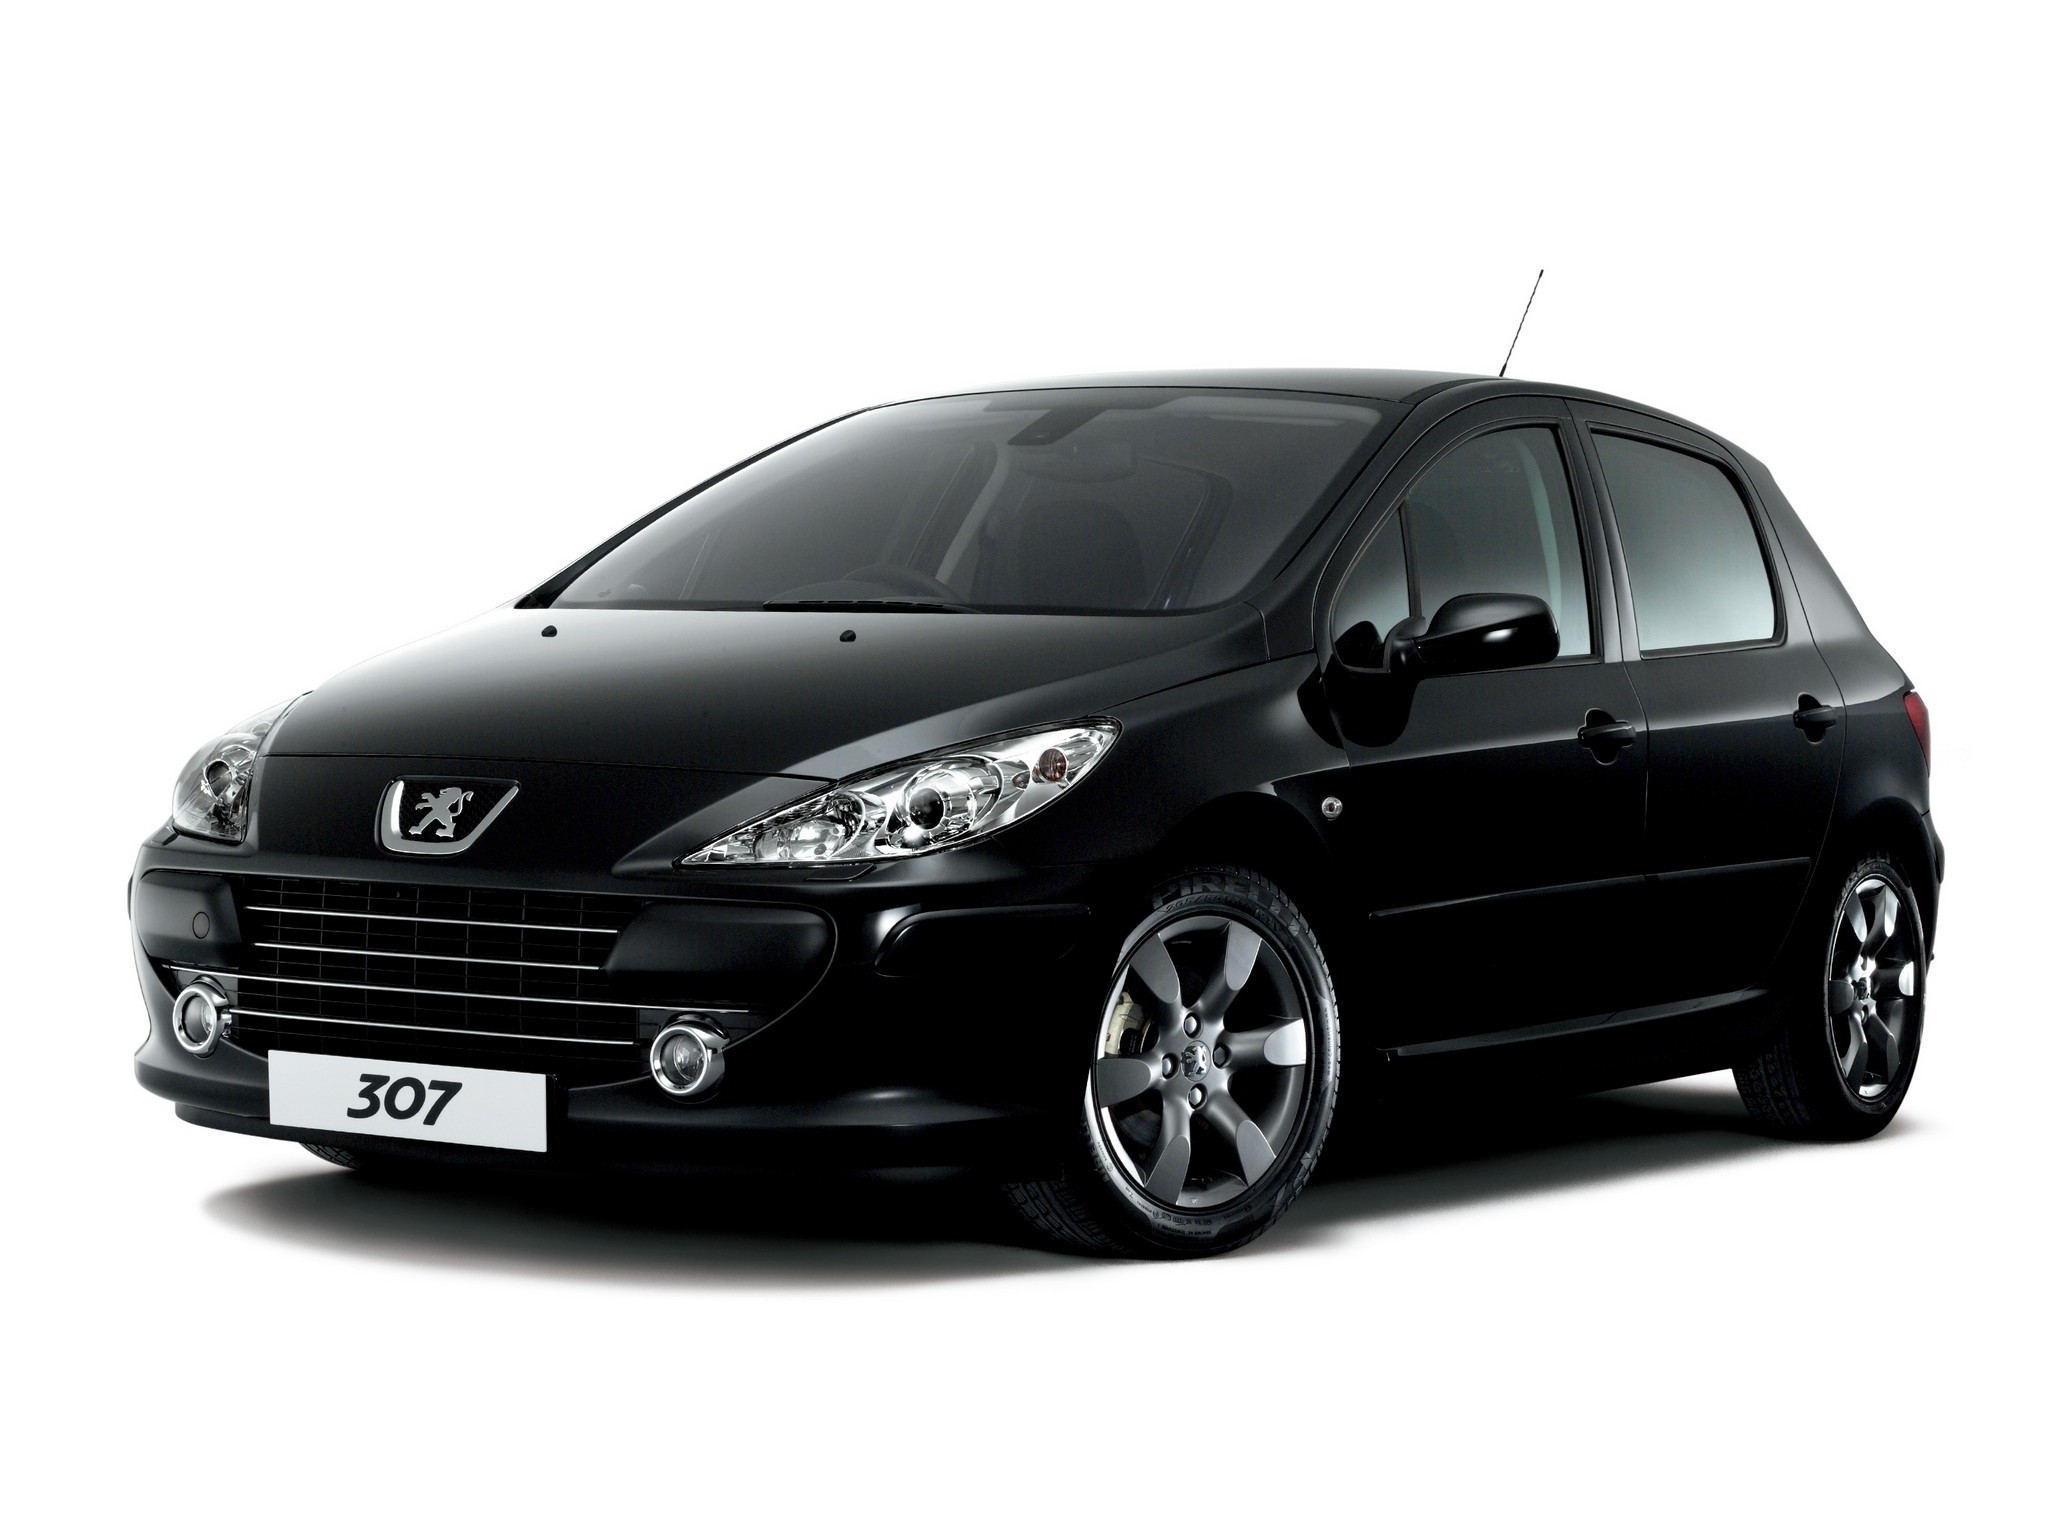 Peugeot Image Photos Gallery In HD